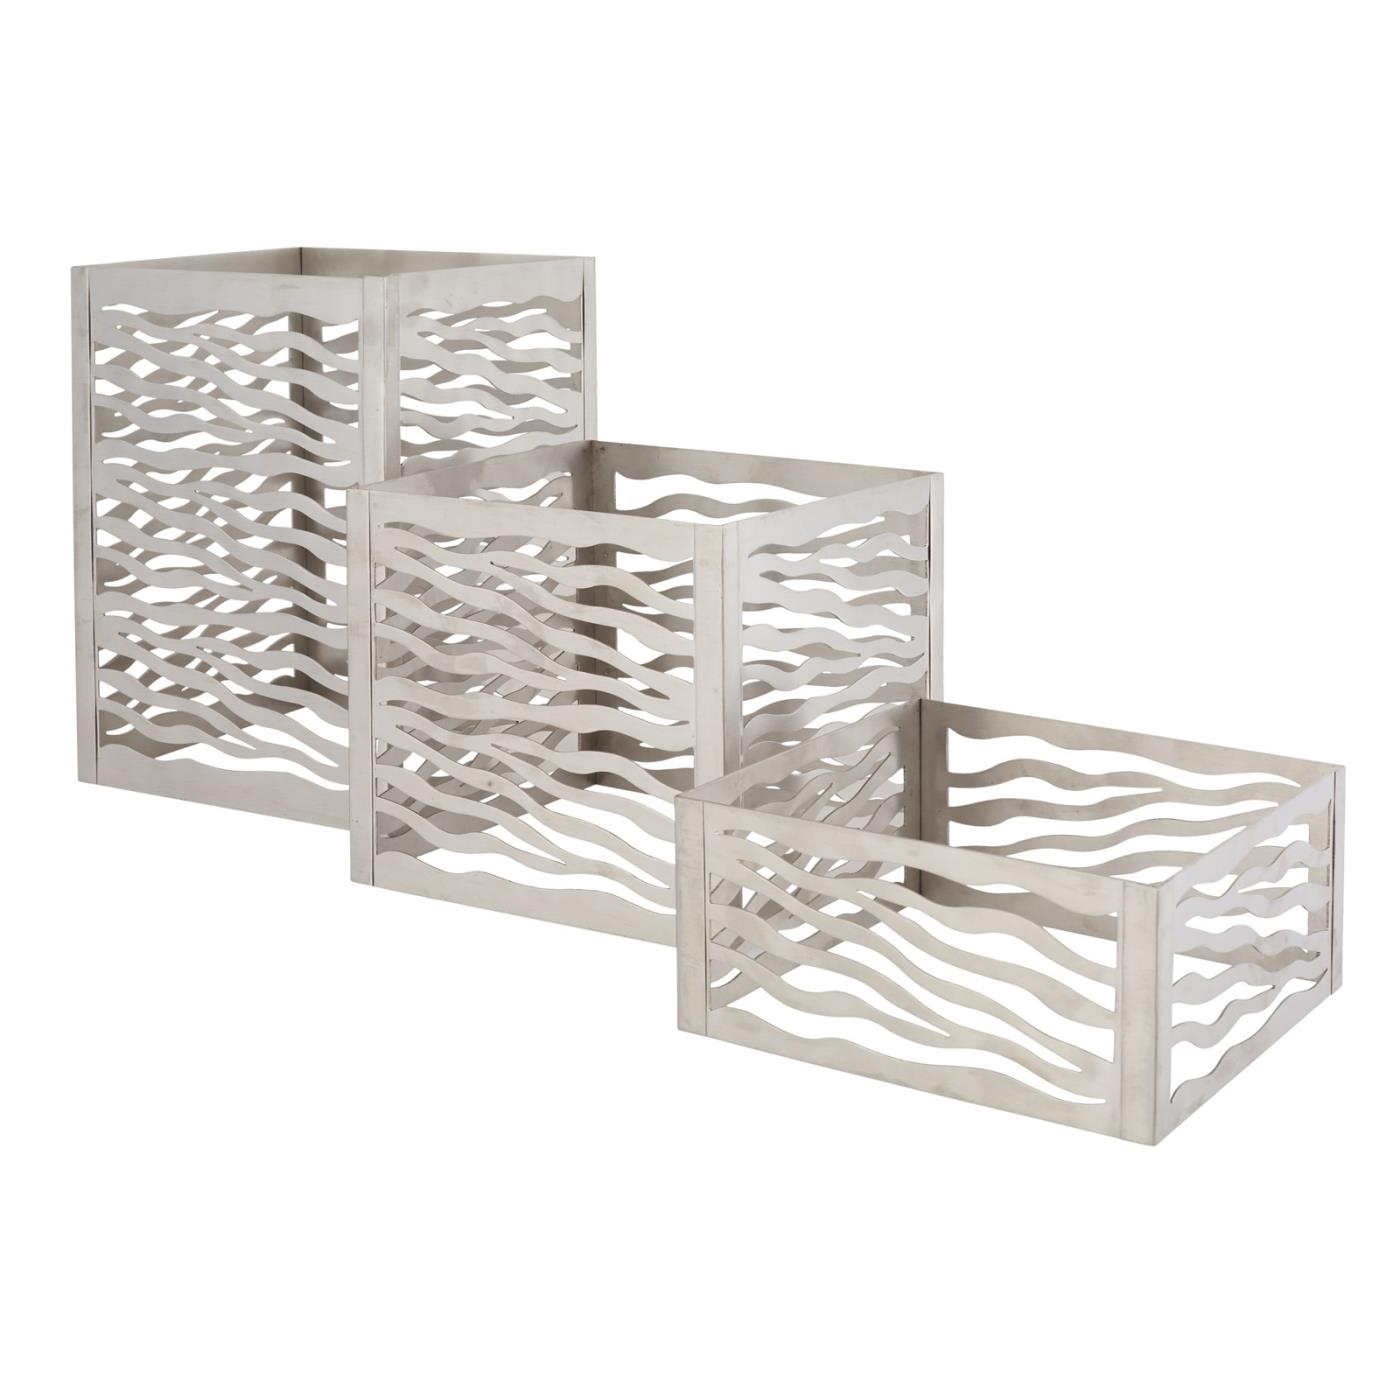 Risers (Set of 3) - Stainless Steel Square Wavy